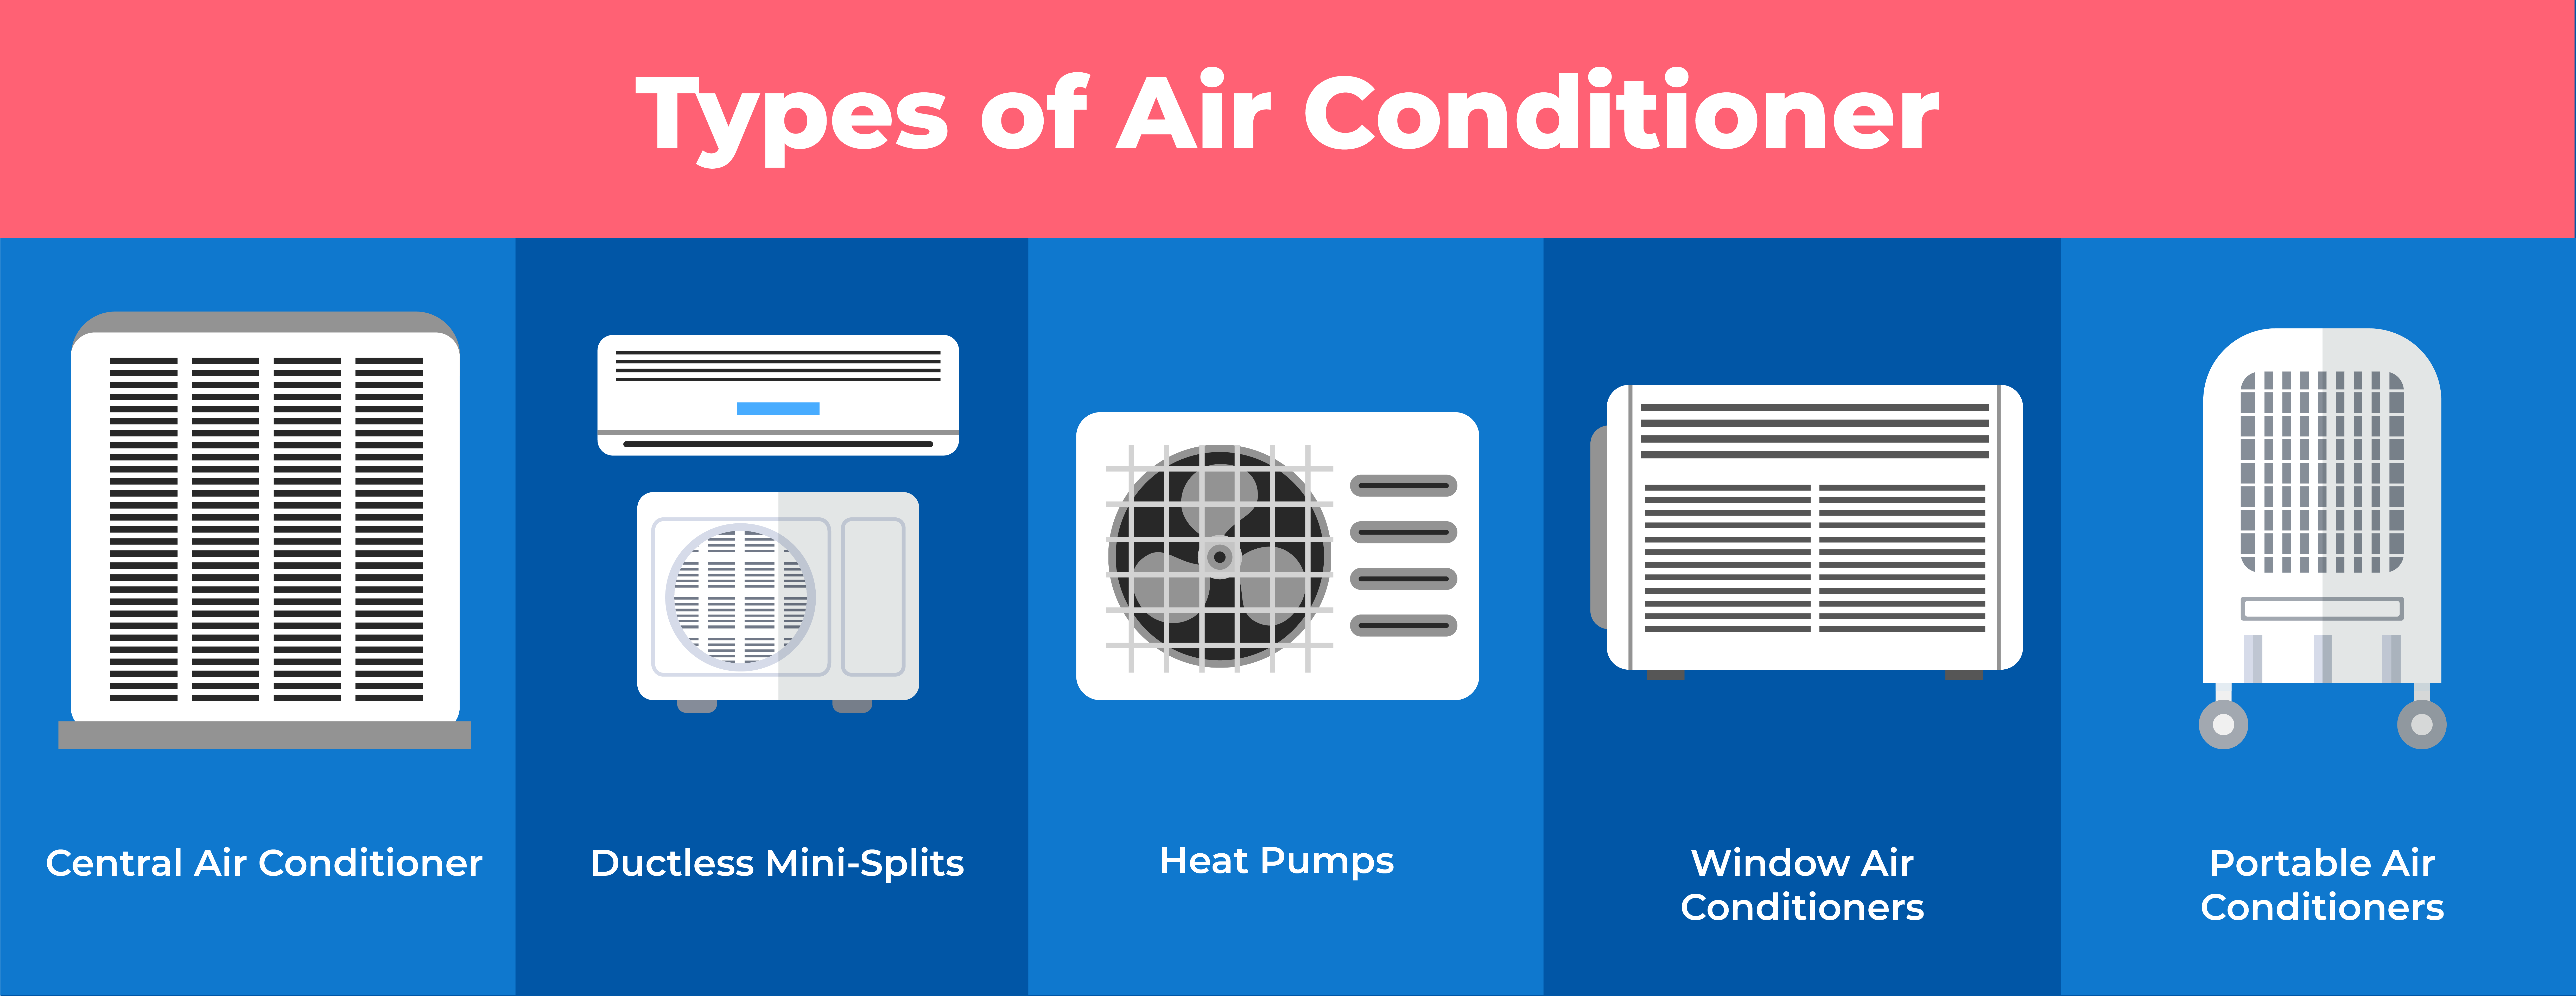 types of air conditioner